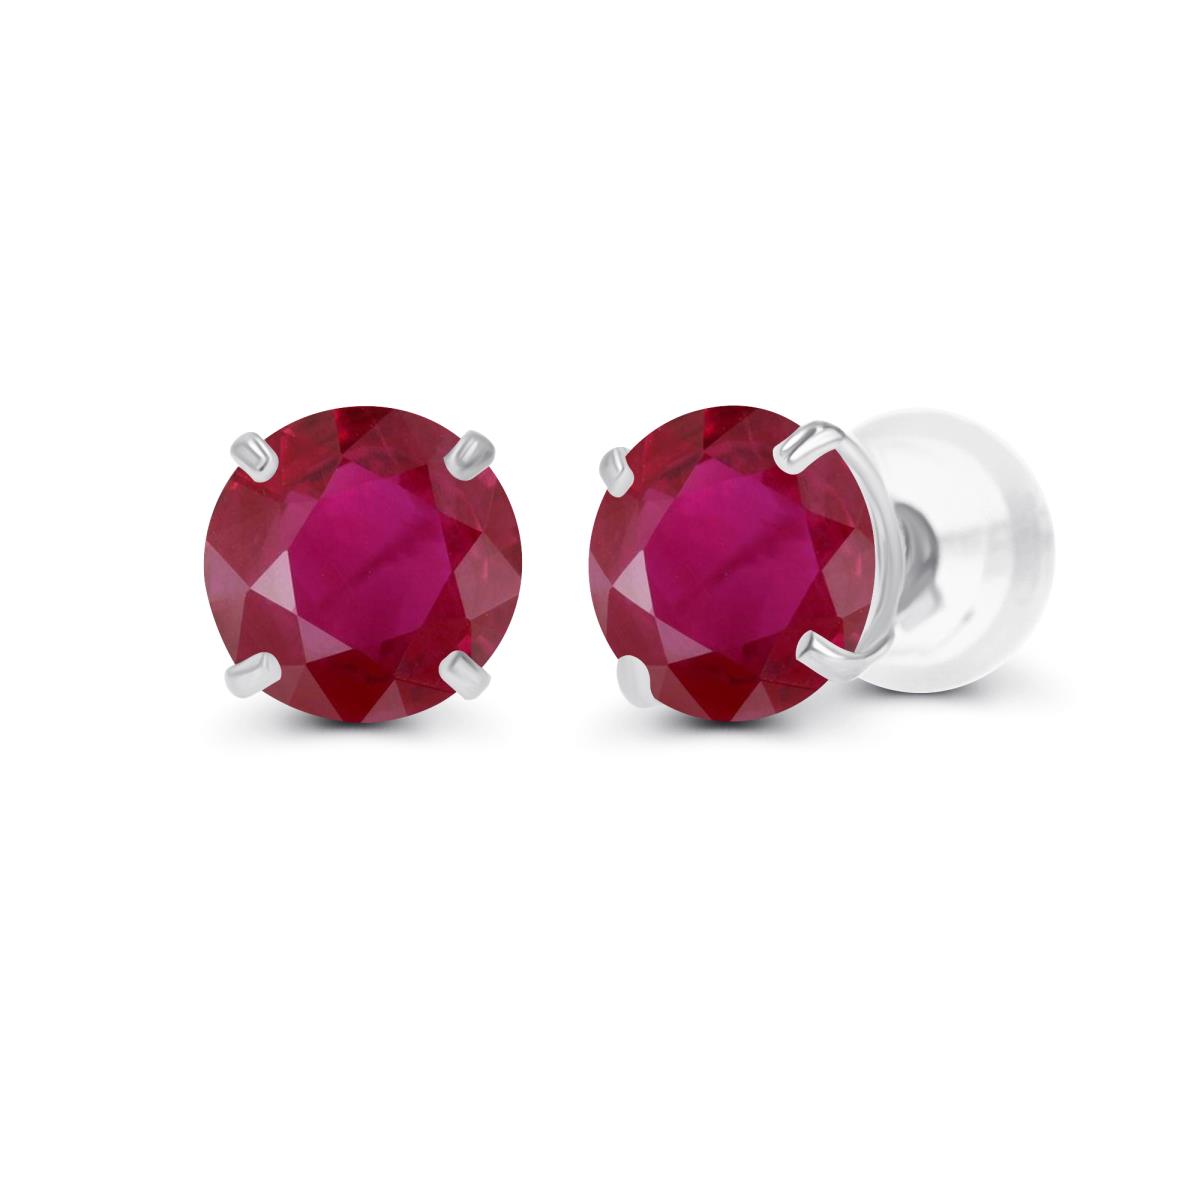 14K White Gold 4.00mm Round Precious Ruby Stud Earring